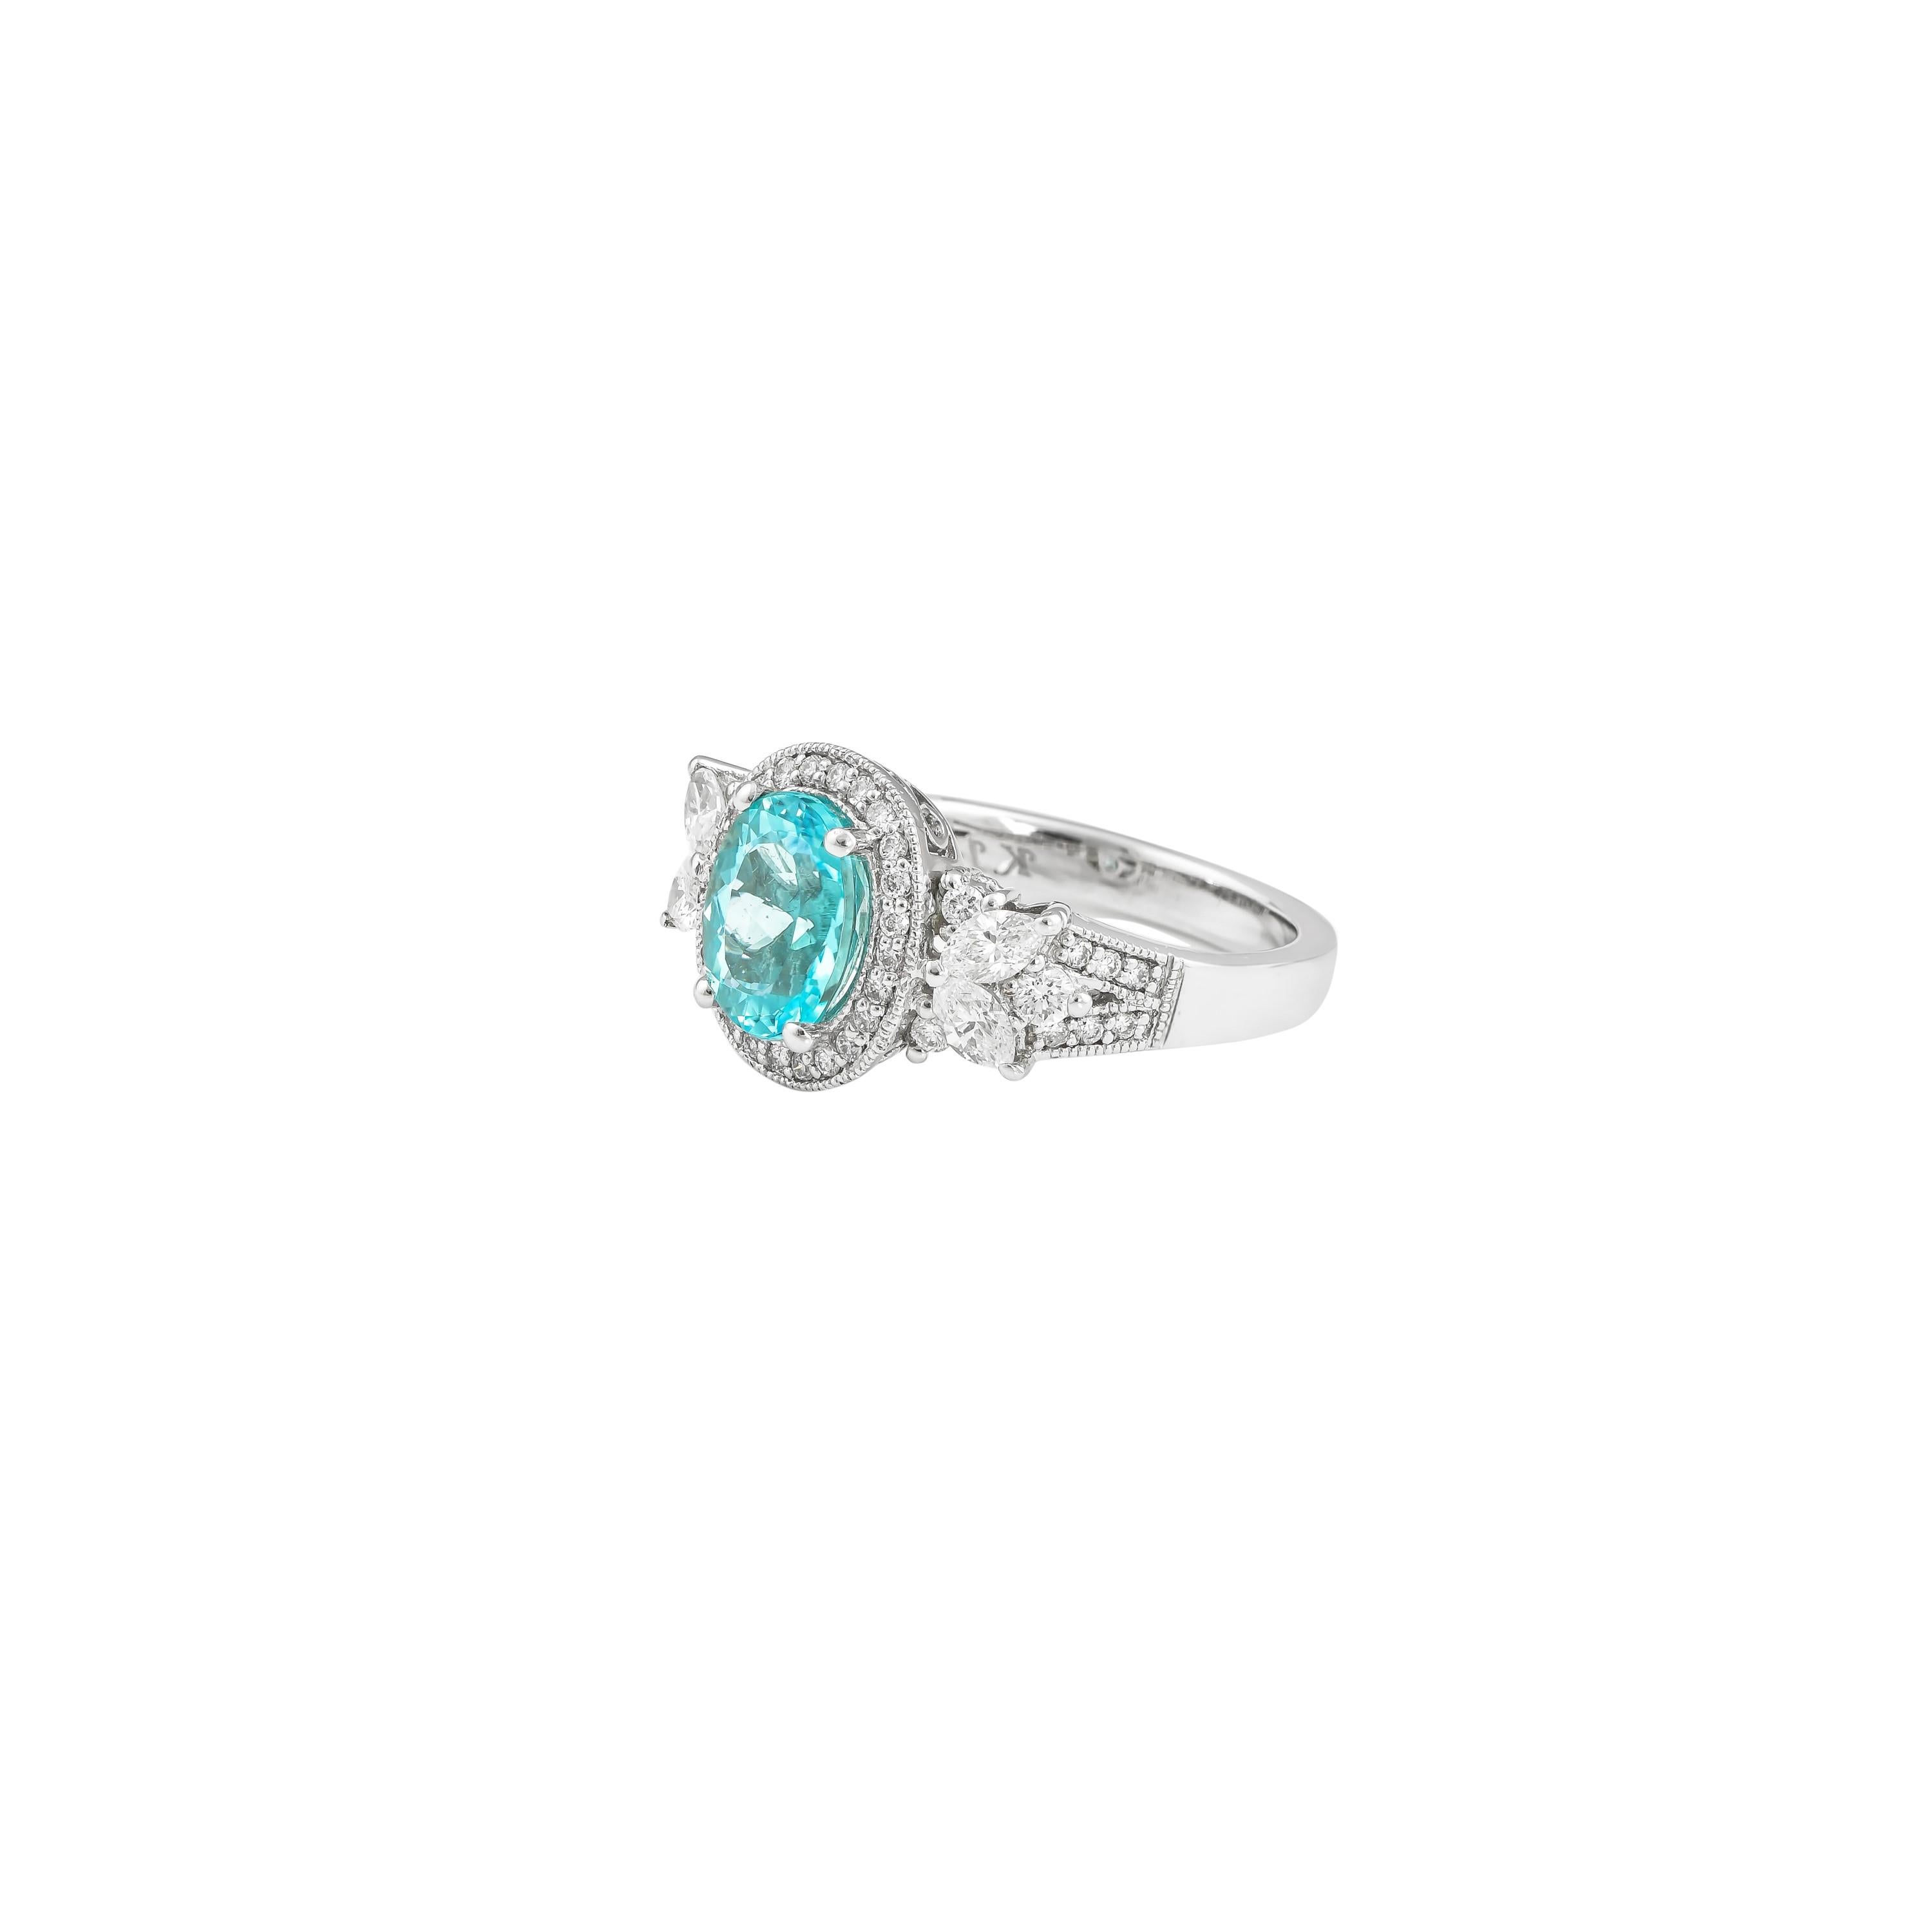 Contemporary 1.7 Carat Paraiba and White Diamond Ring in 18 Karat White Gold For Sale